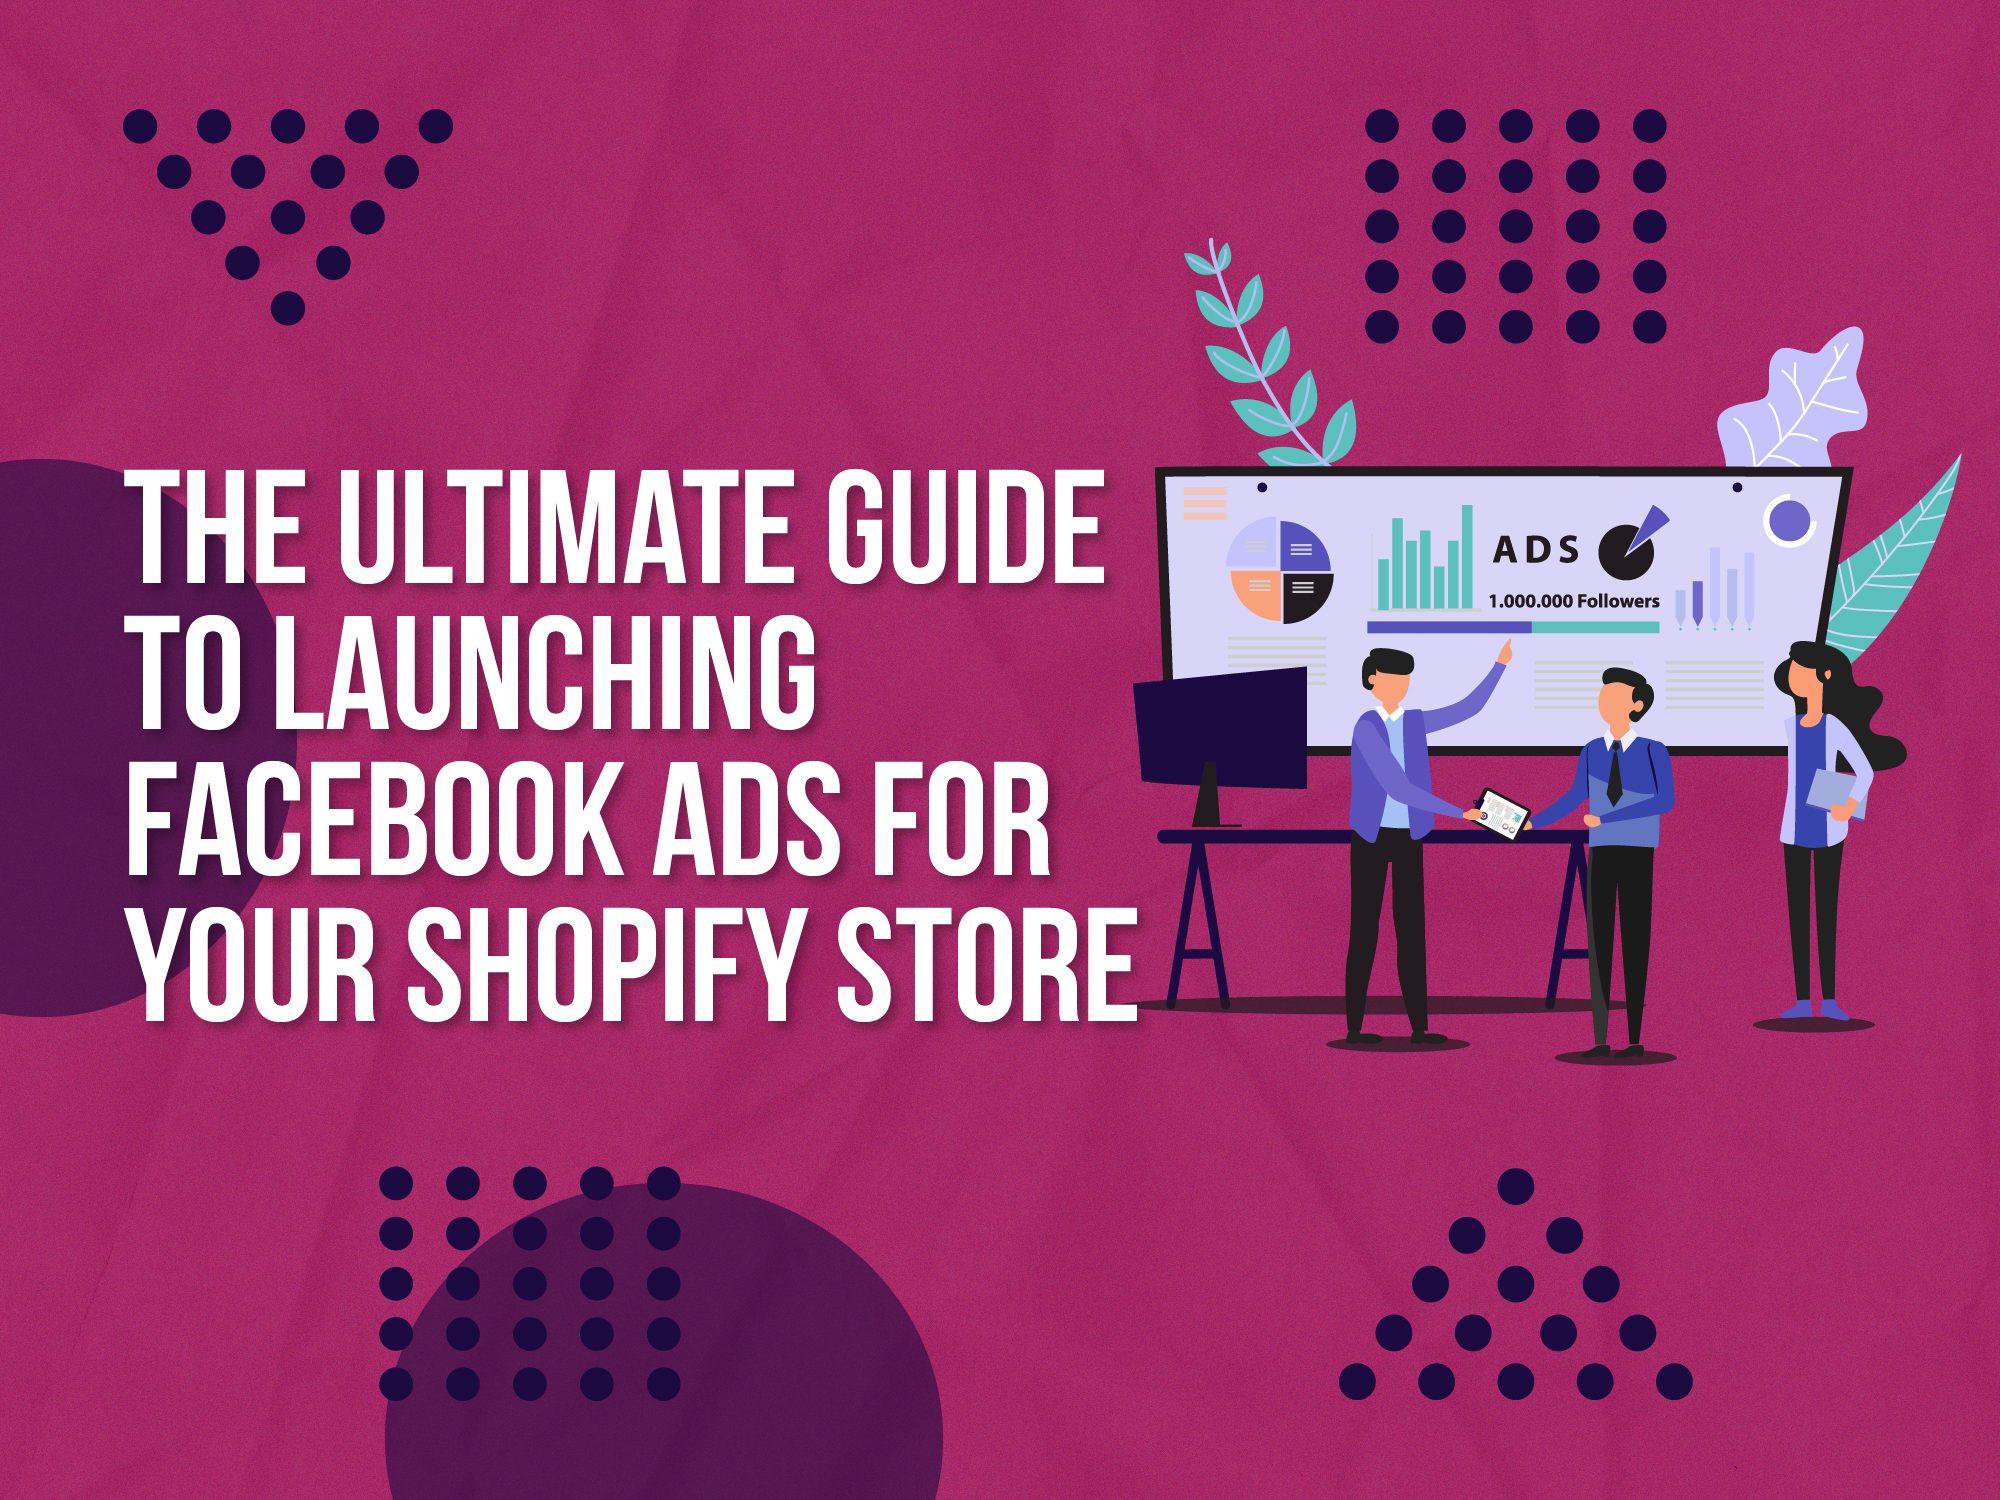 The Ultimate Guide To Launching Facebook Ads For Your Shopify Store